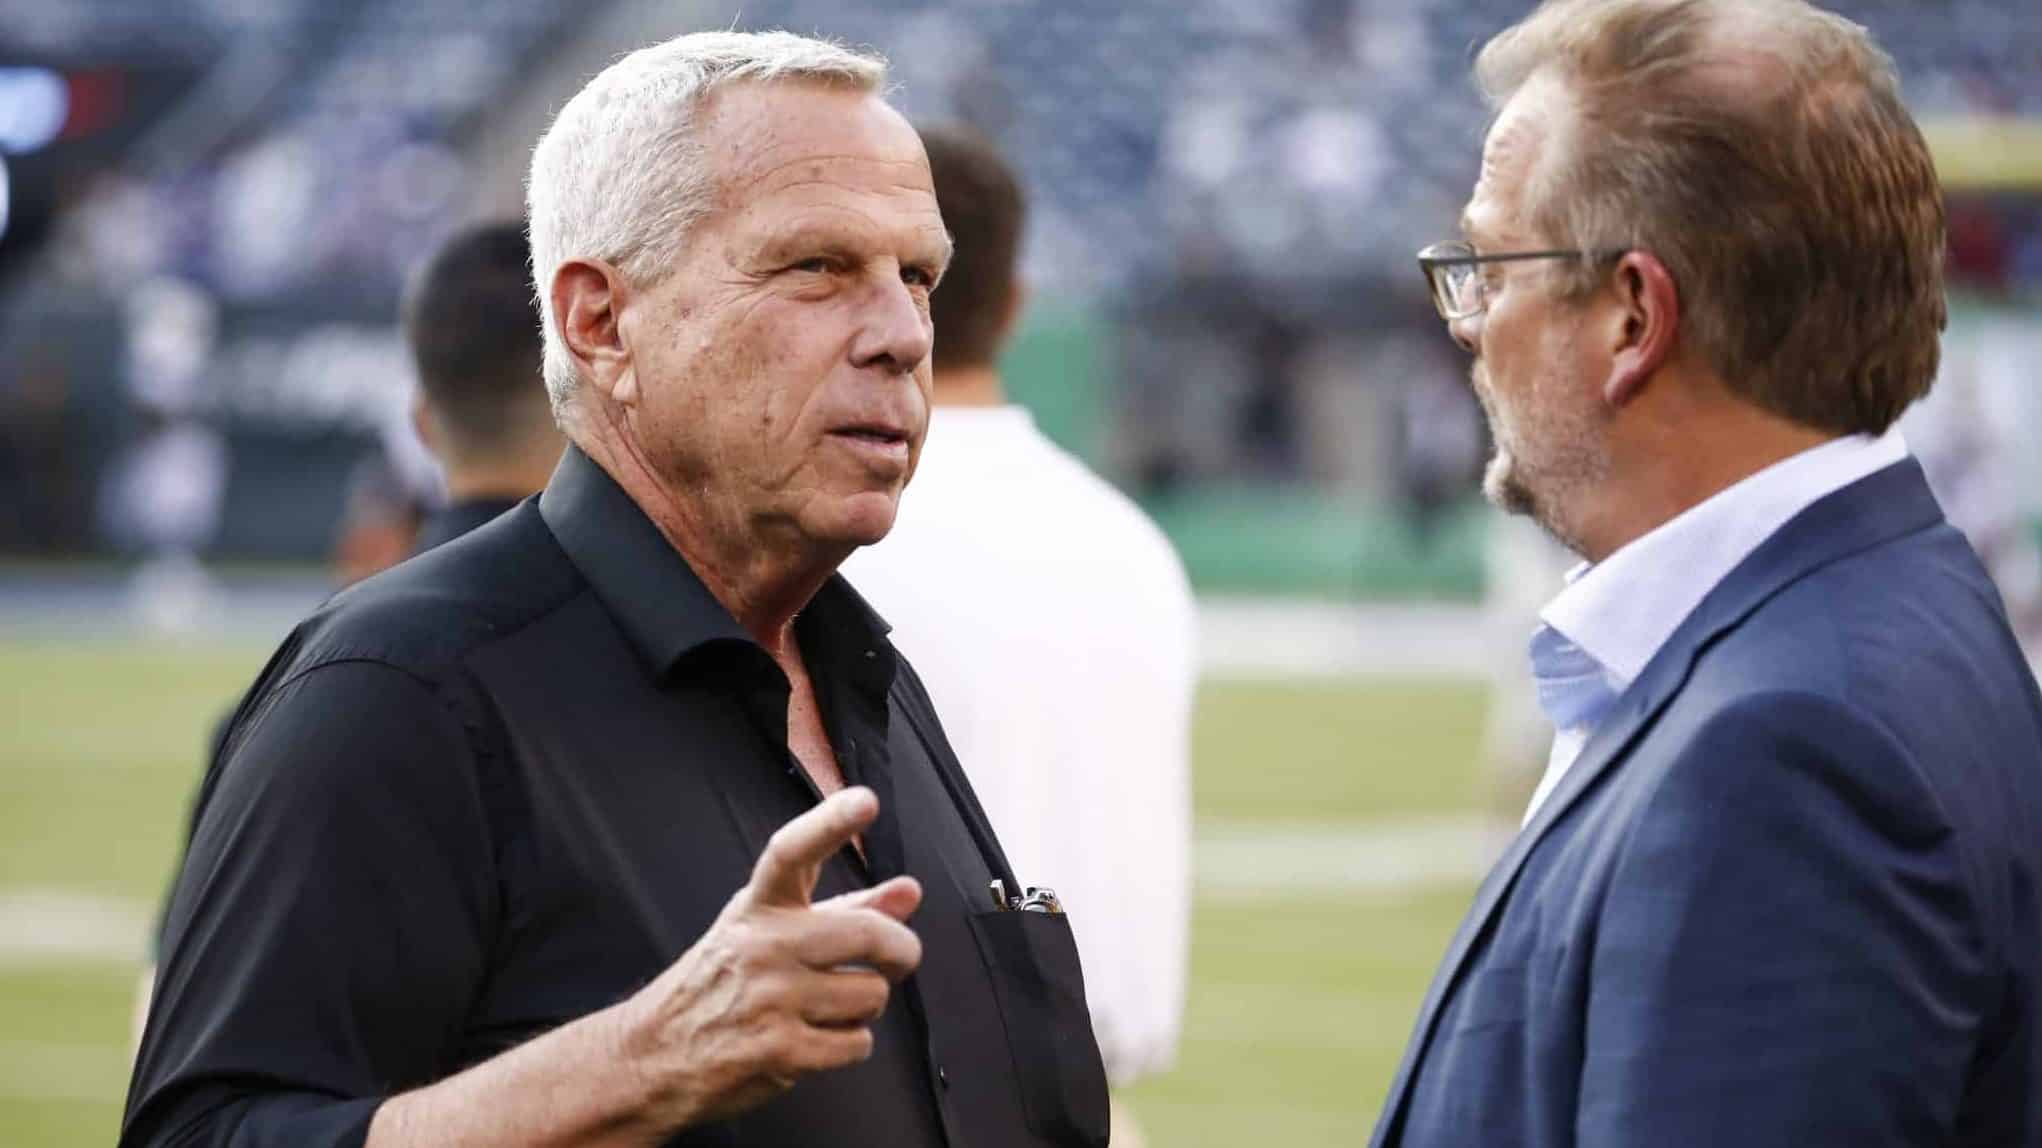 EAST RUTHERFORD, NJ - AUGUST 24: New York Giants chairman Steve Tisch talks with New York Jets GM Mike Maccagnan on the sidelines before a preseason game against the New York Jets at MetLife Stadium on August 24, 2018 in East Rutherford, New Jersey.